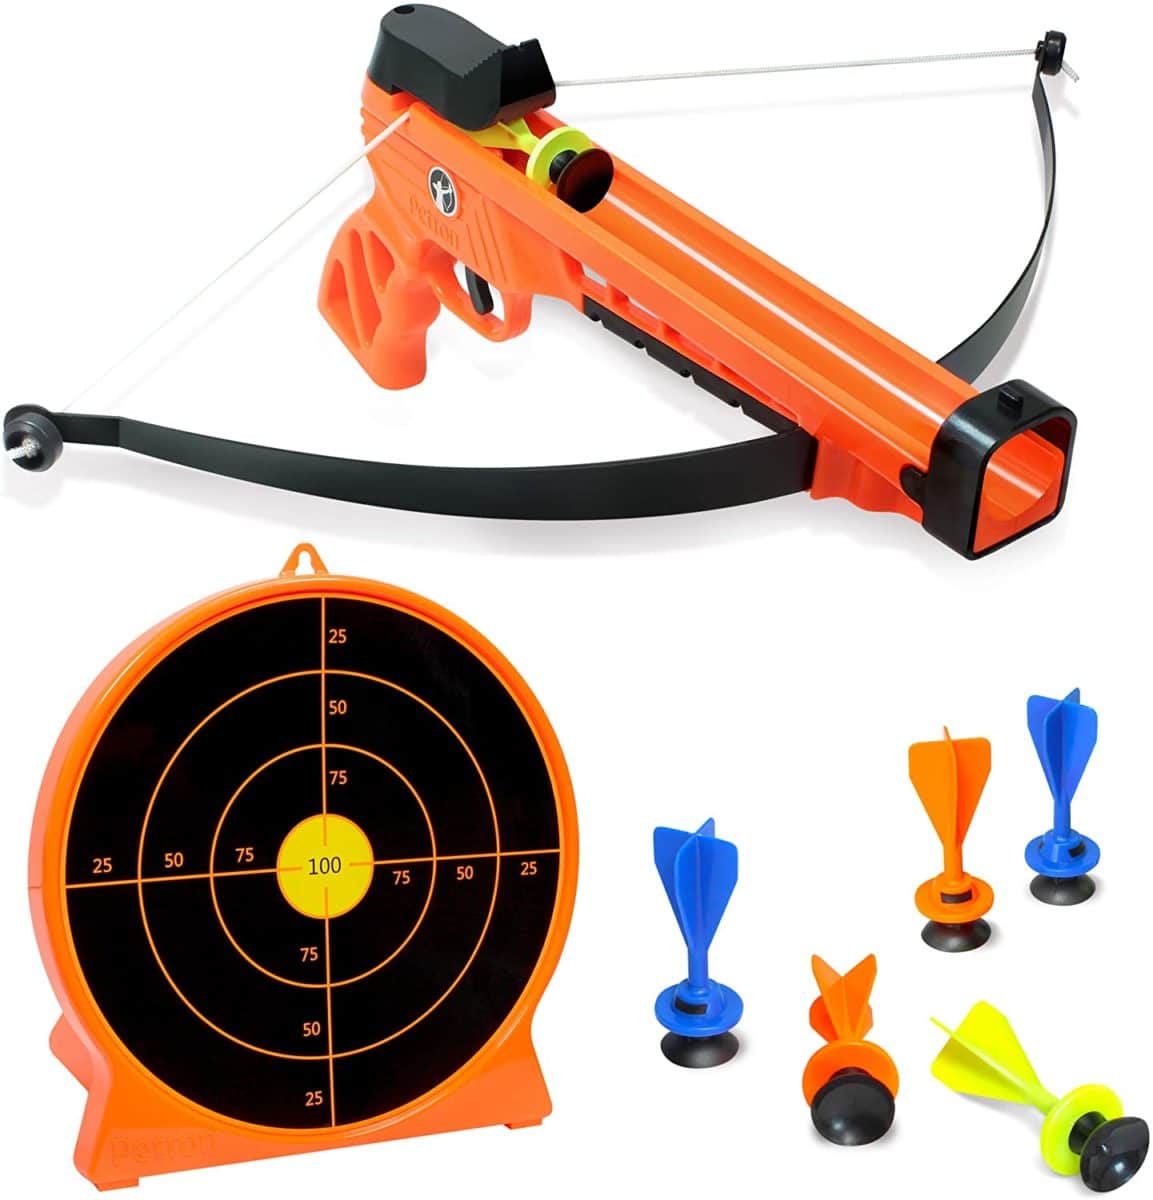 ArmoGear Kids Archery Set - Top Toys and Gifts for Ten Year Old Boys 1